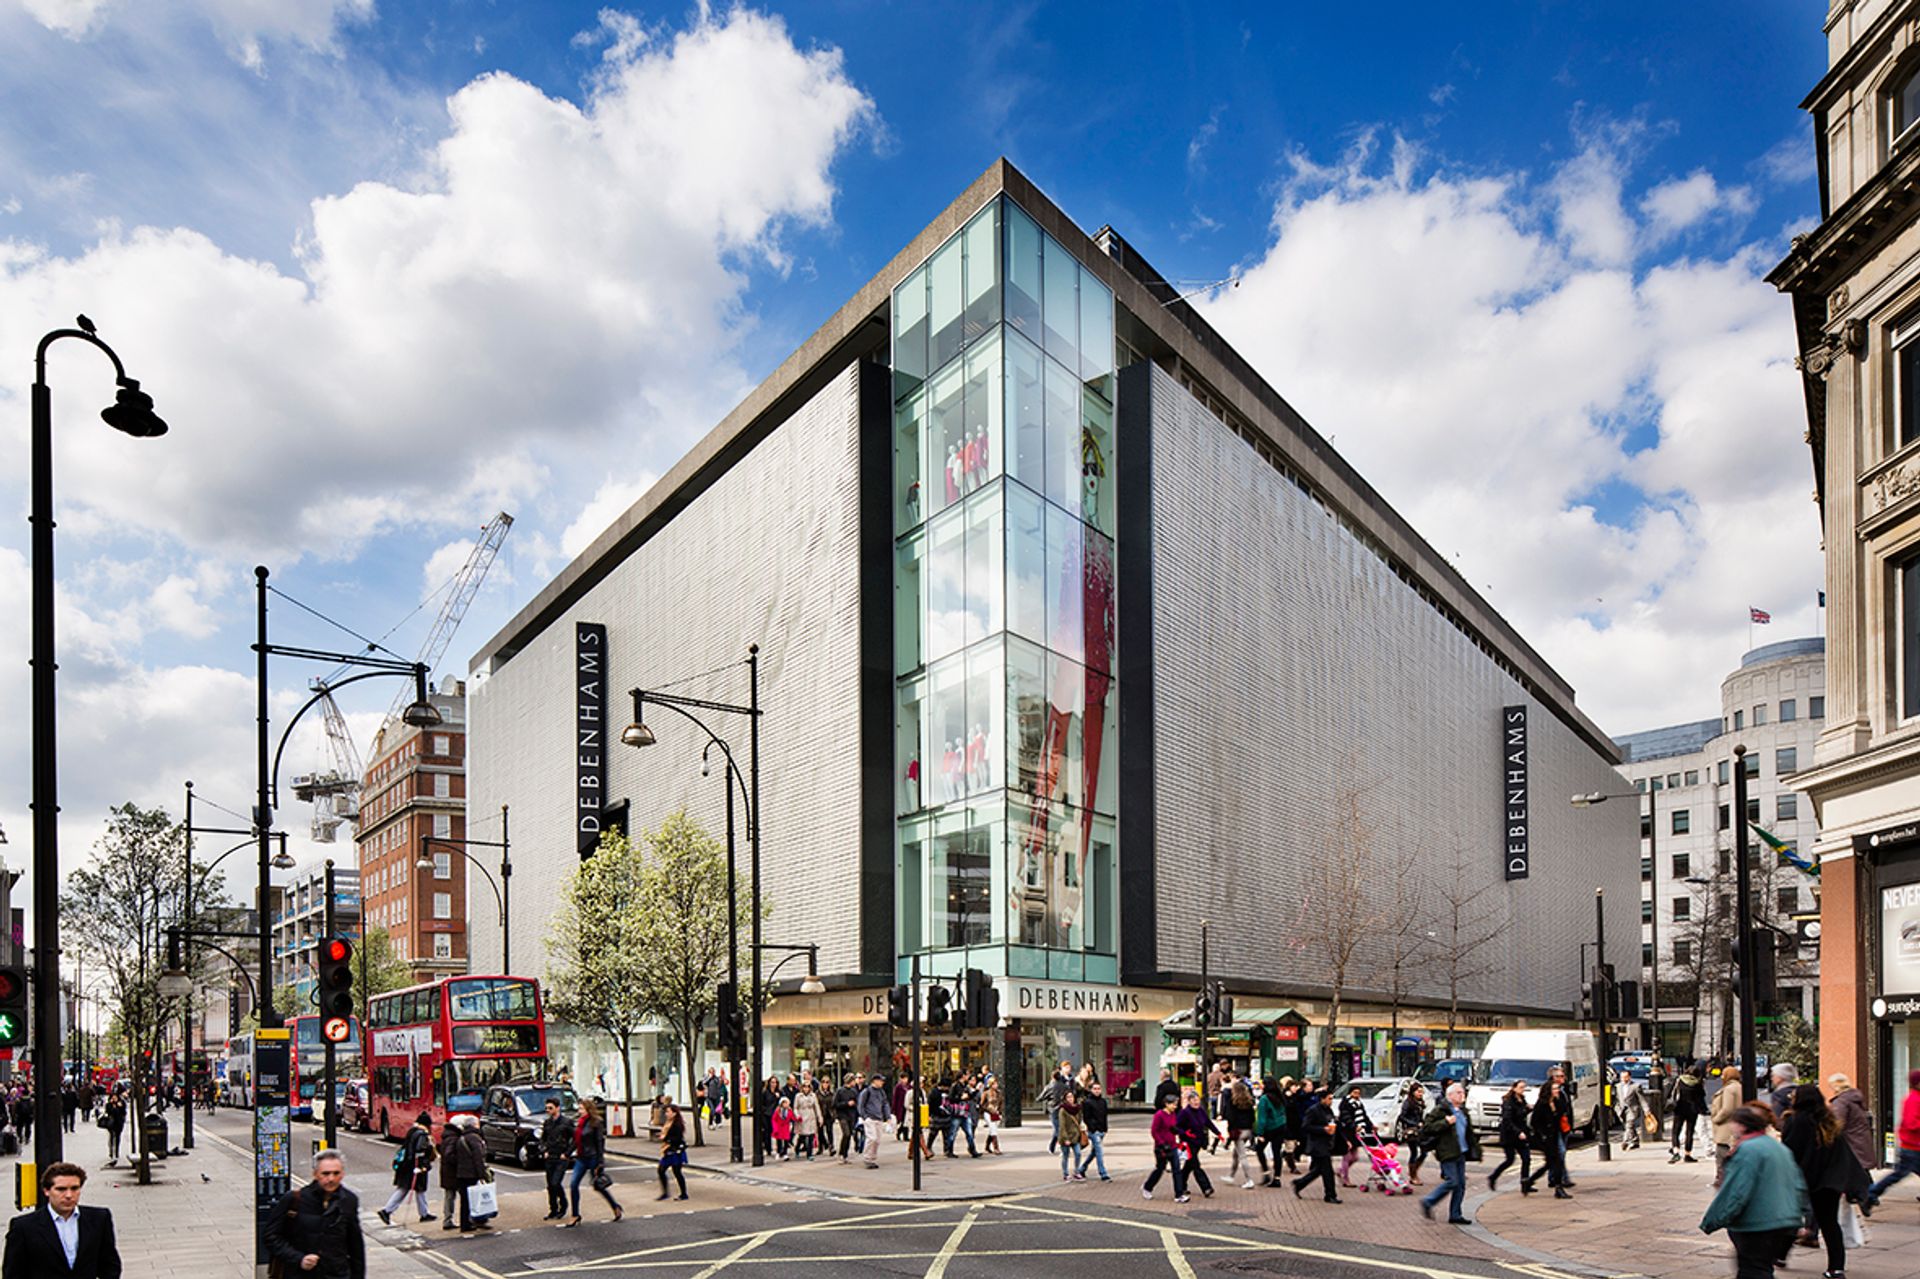 The now closed retail store Debenhams in London’s Oxford Street could be converted into a major arts hub 